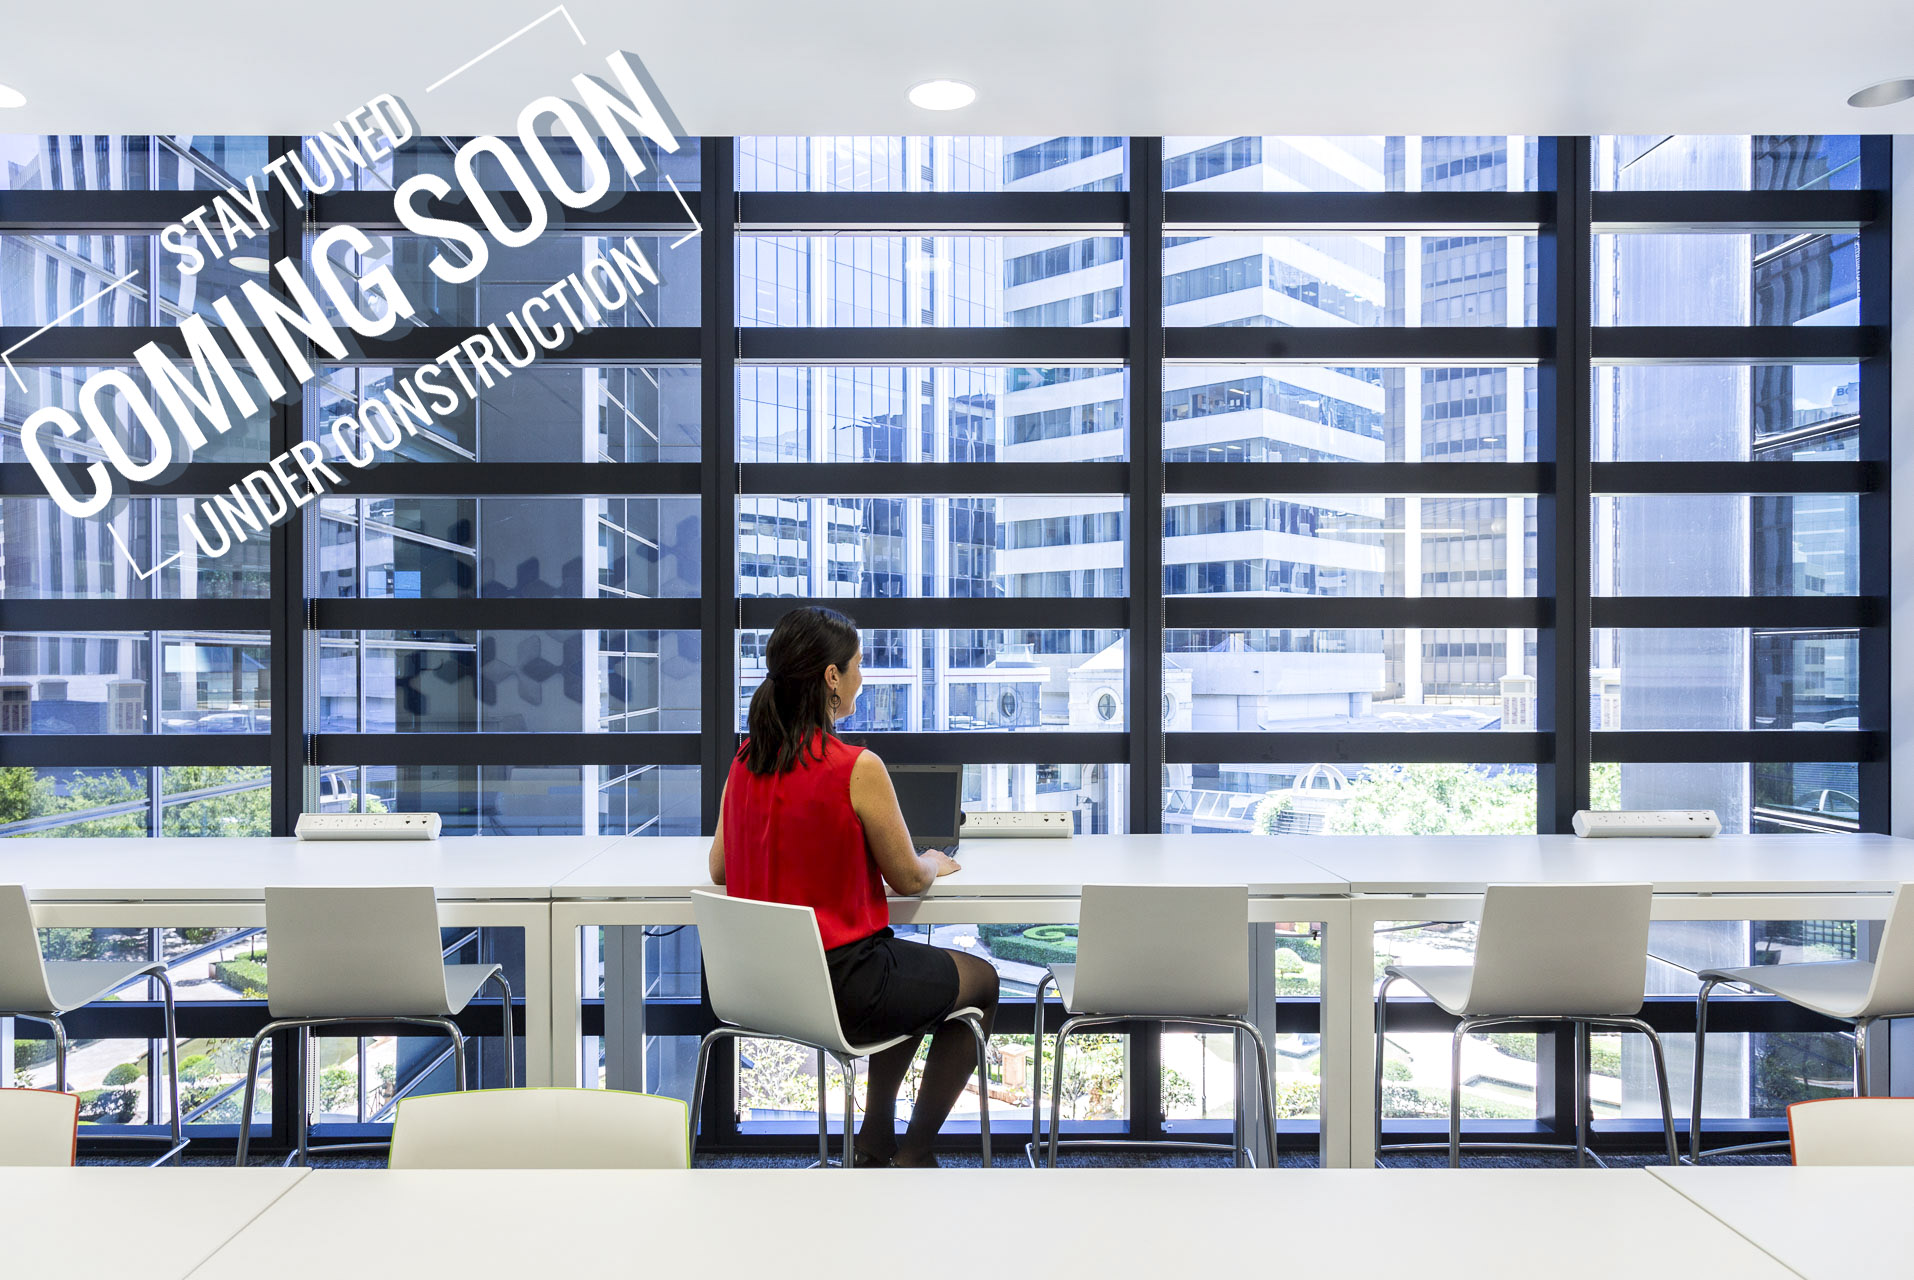 Business & Commercial Photography course coming soon